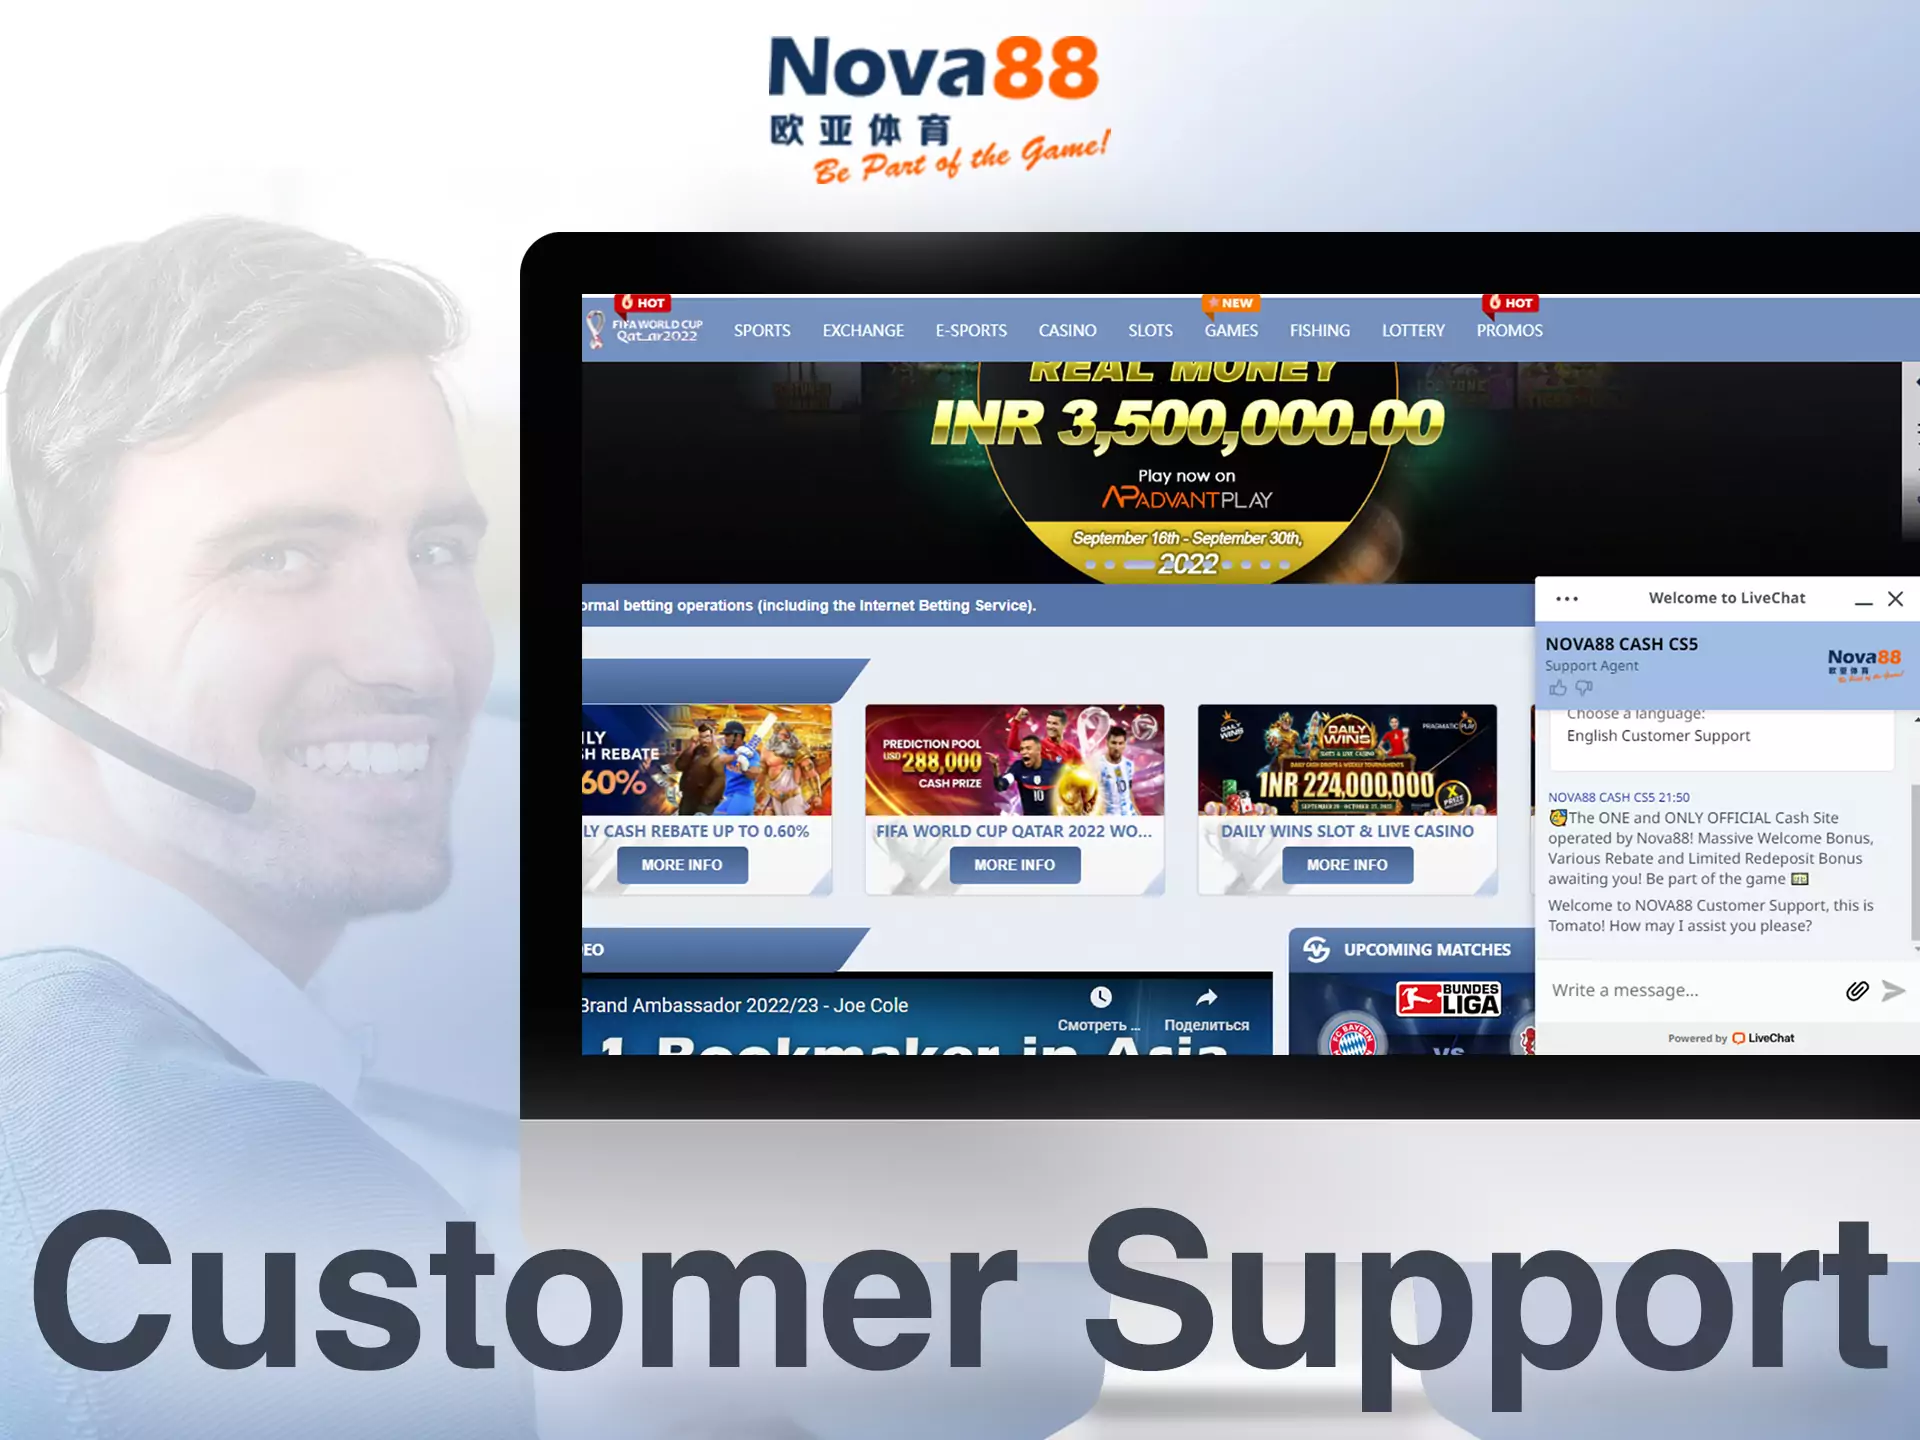 Nova88 customer support is always ready to help.